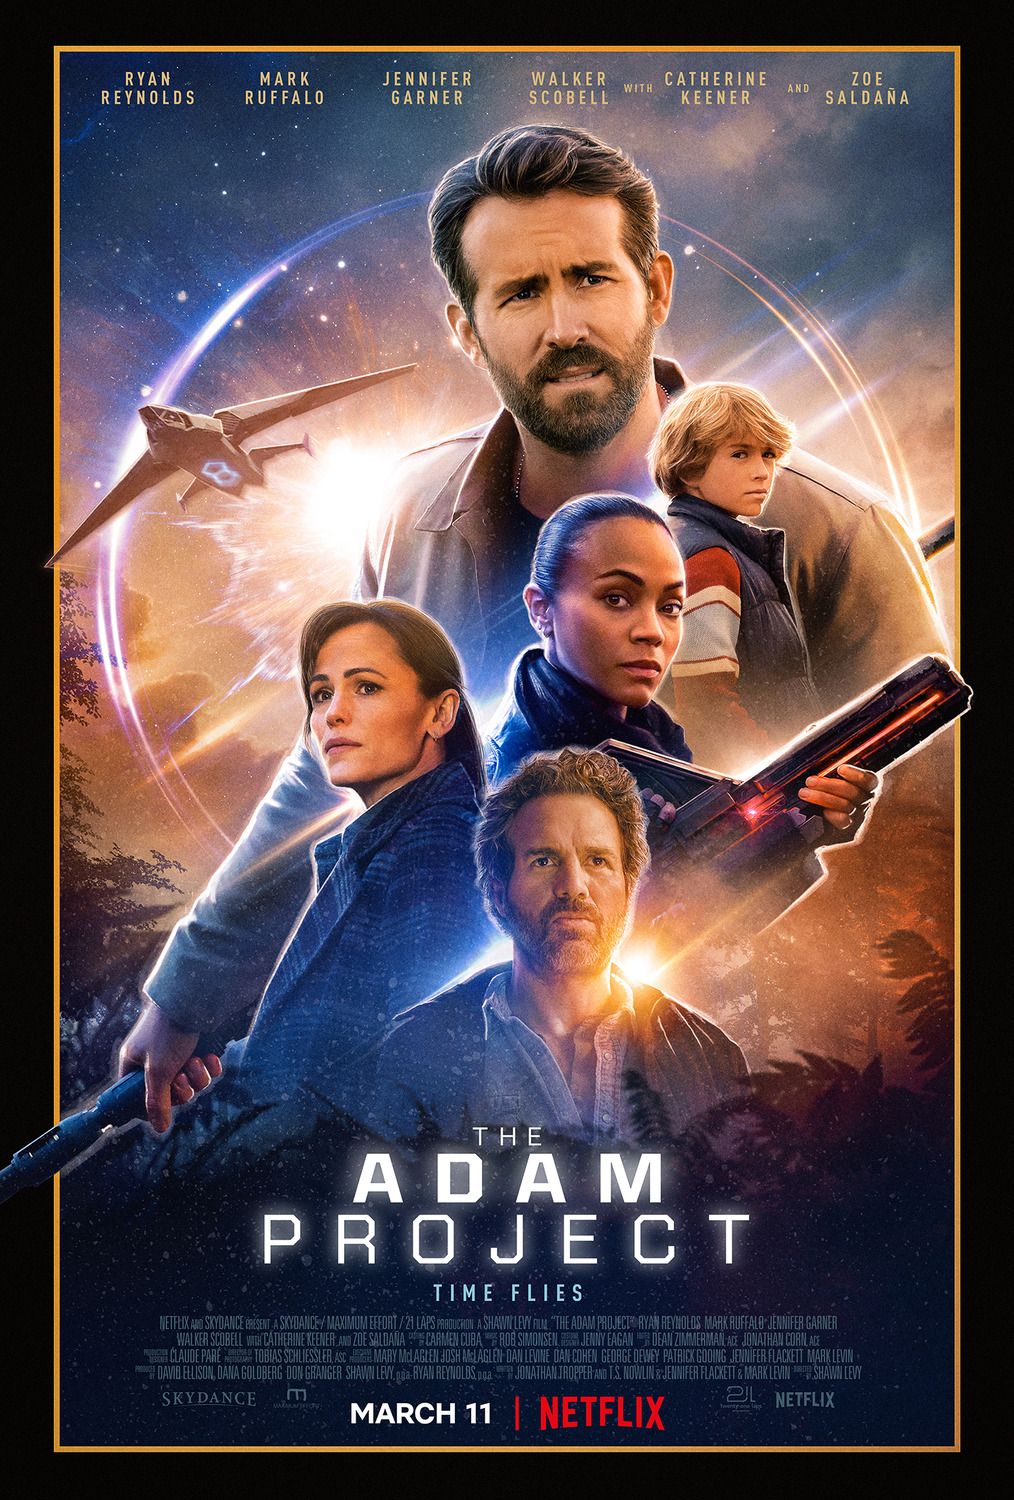 The Adam Project Film Poster